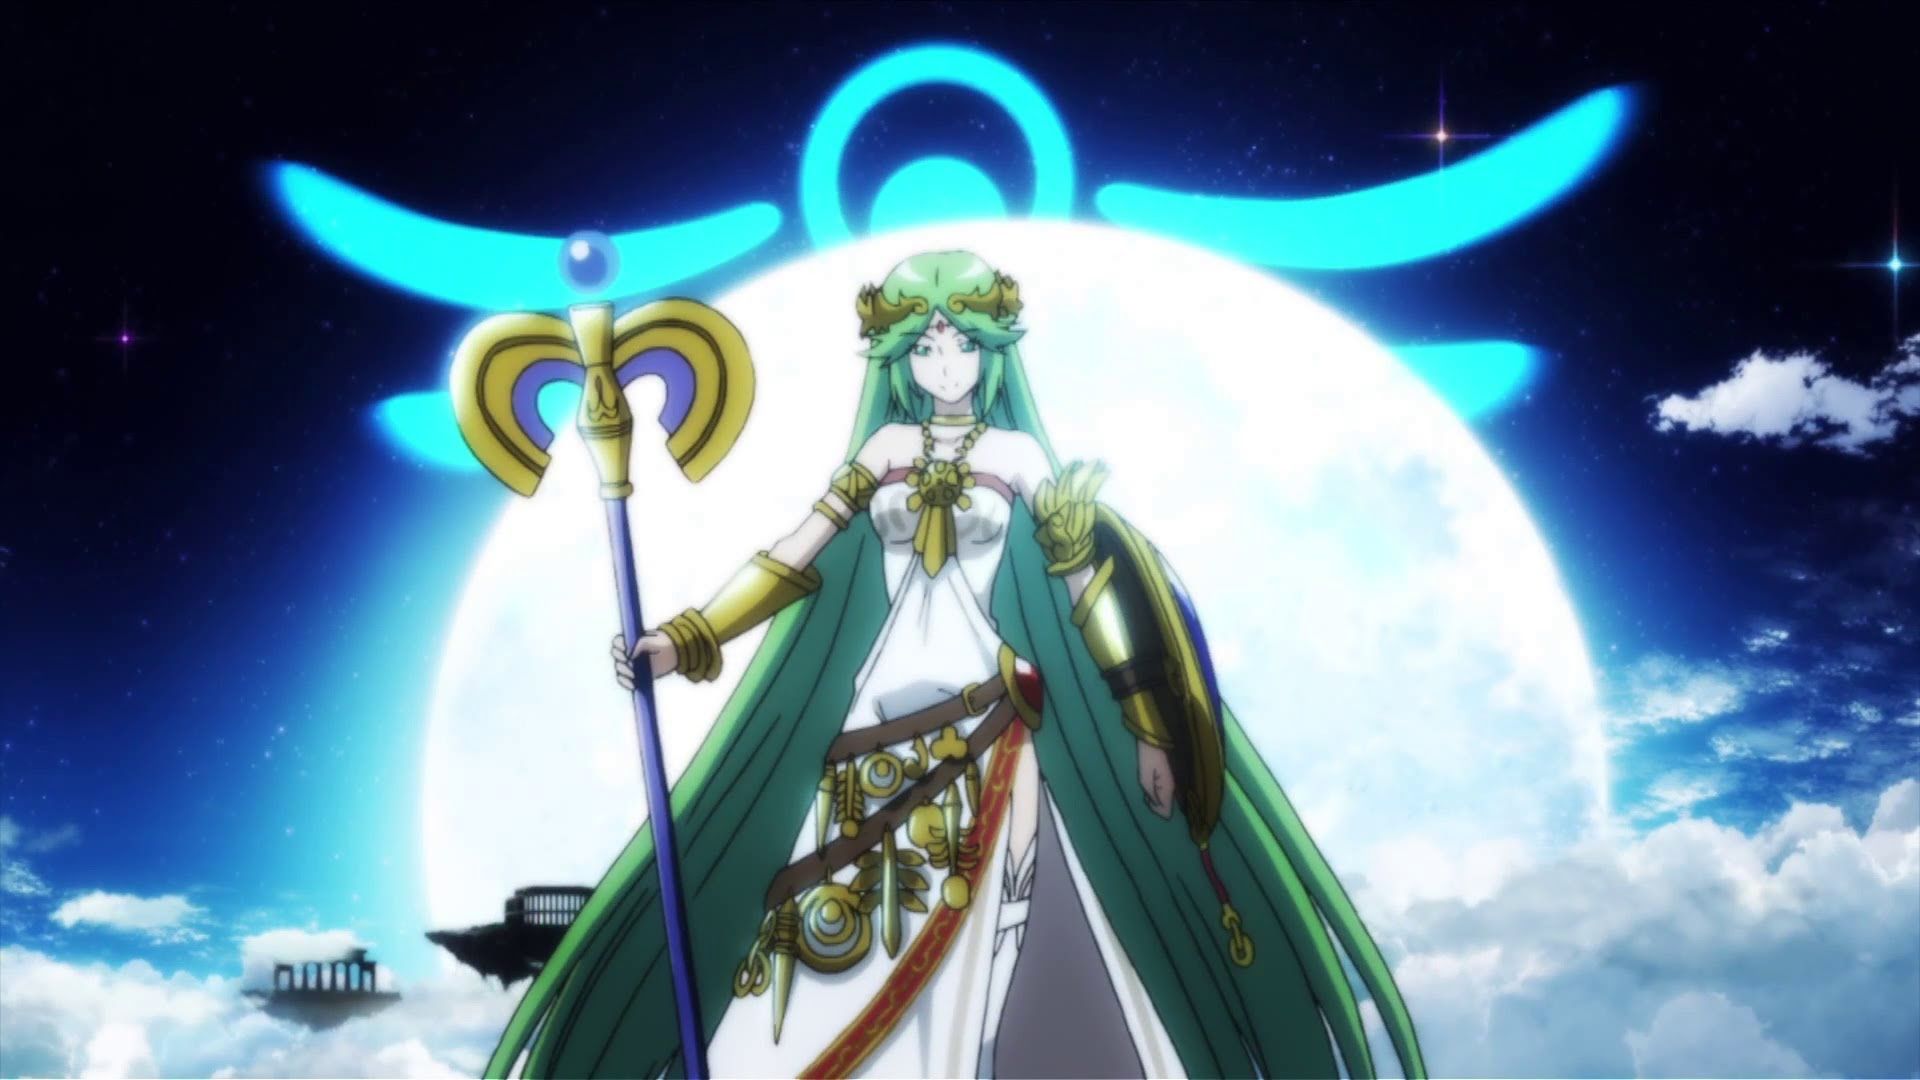 Palutena casting magic in front of the moon in Kid Icarus